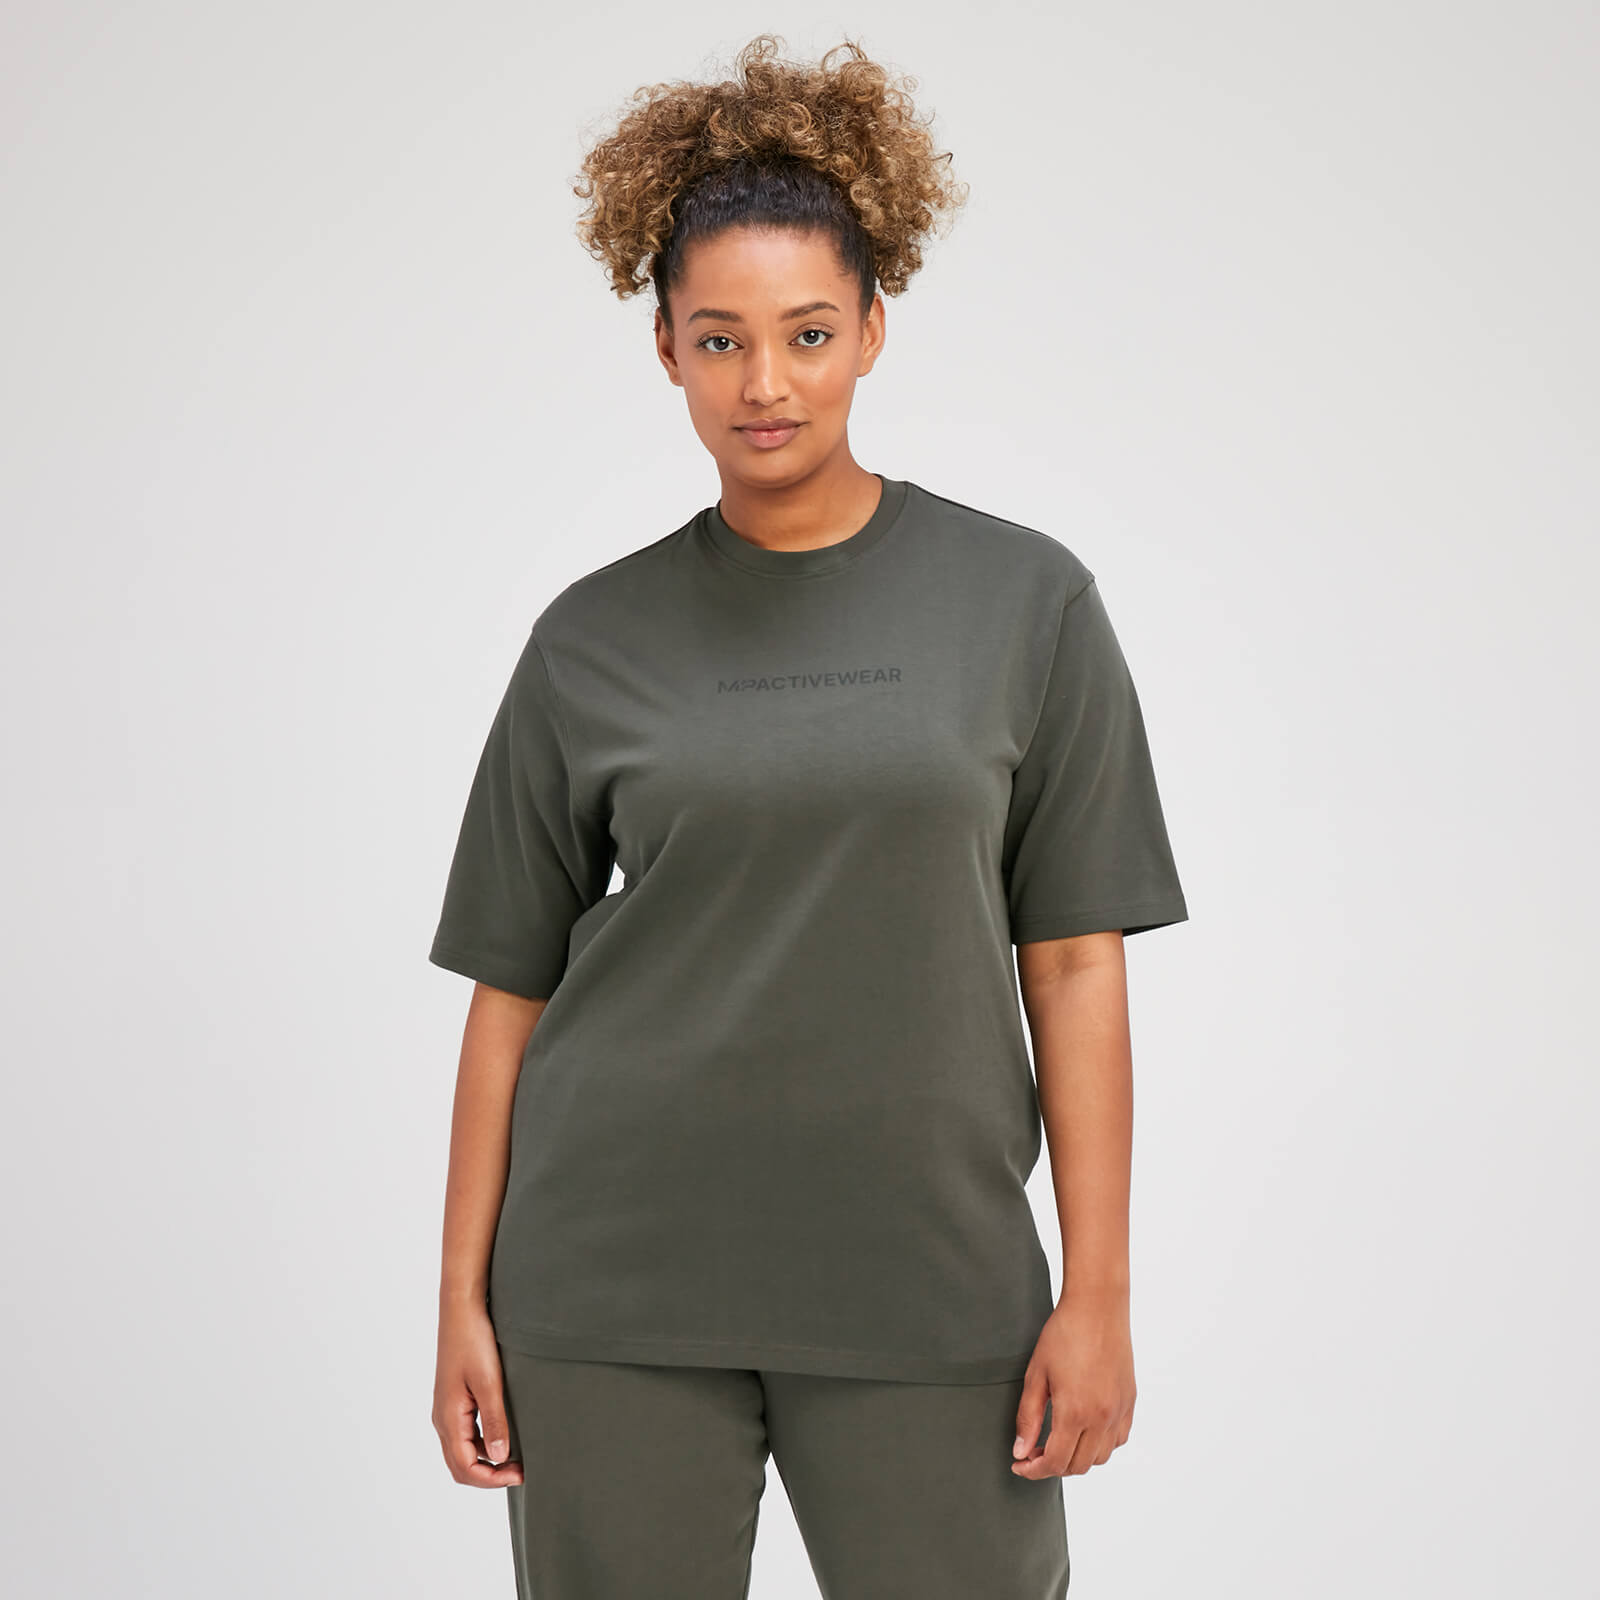 T-shirt oversize MP Rest Day pour femmes – Vert taupe - XS